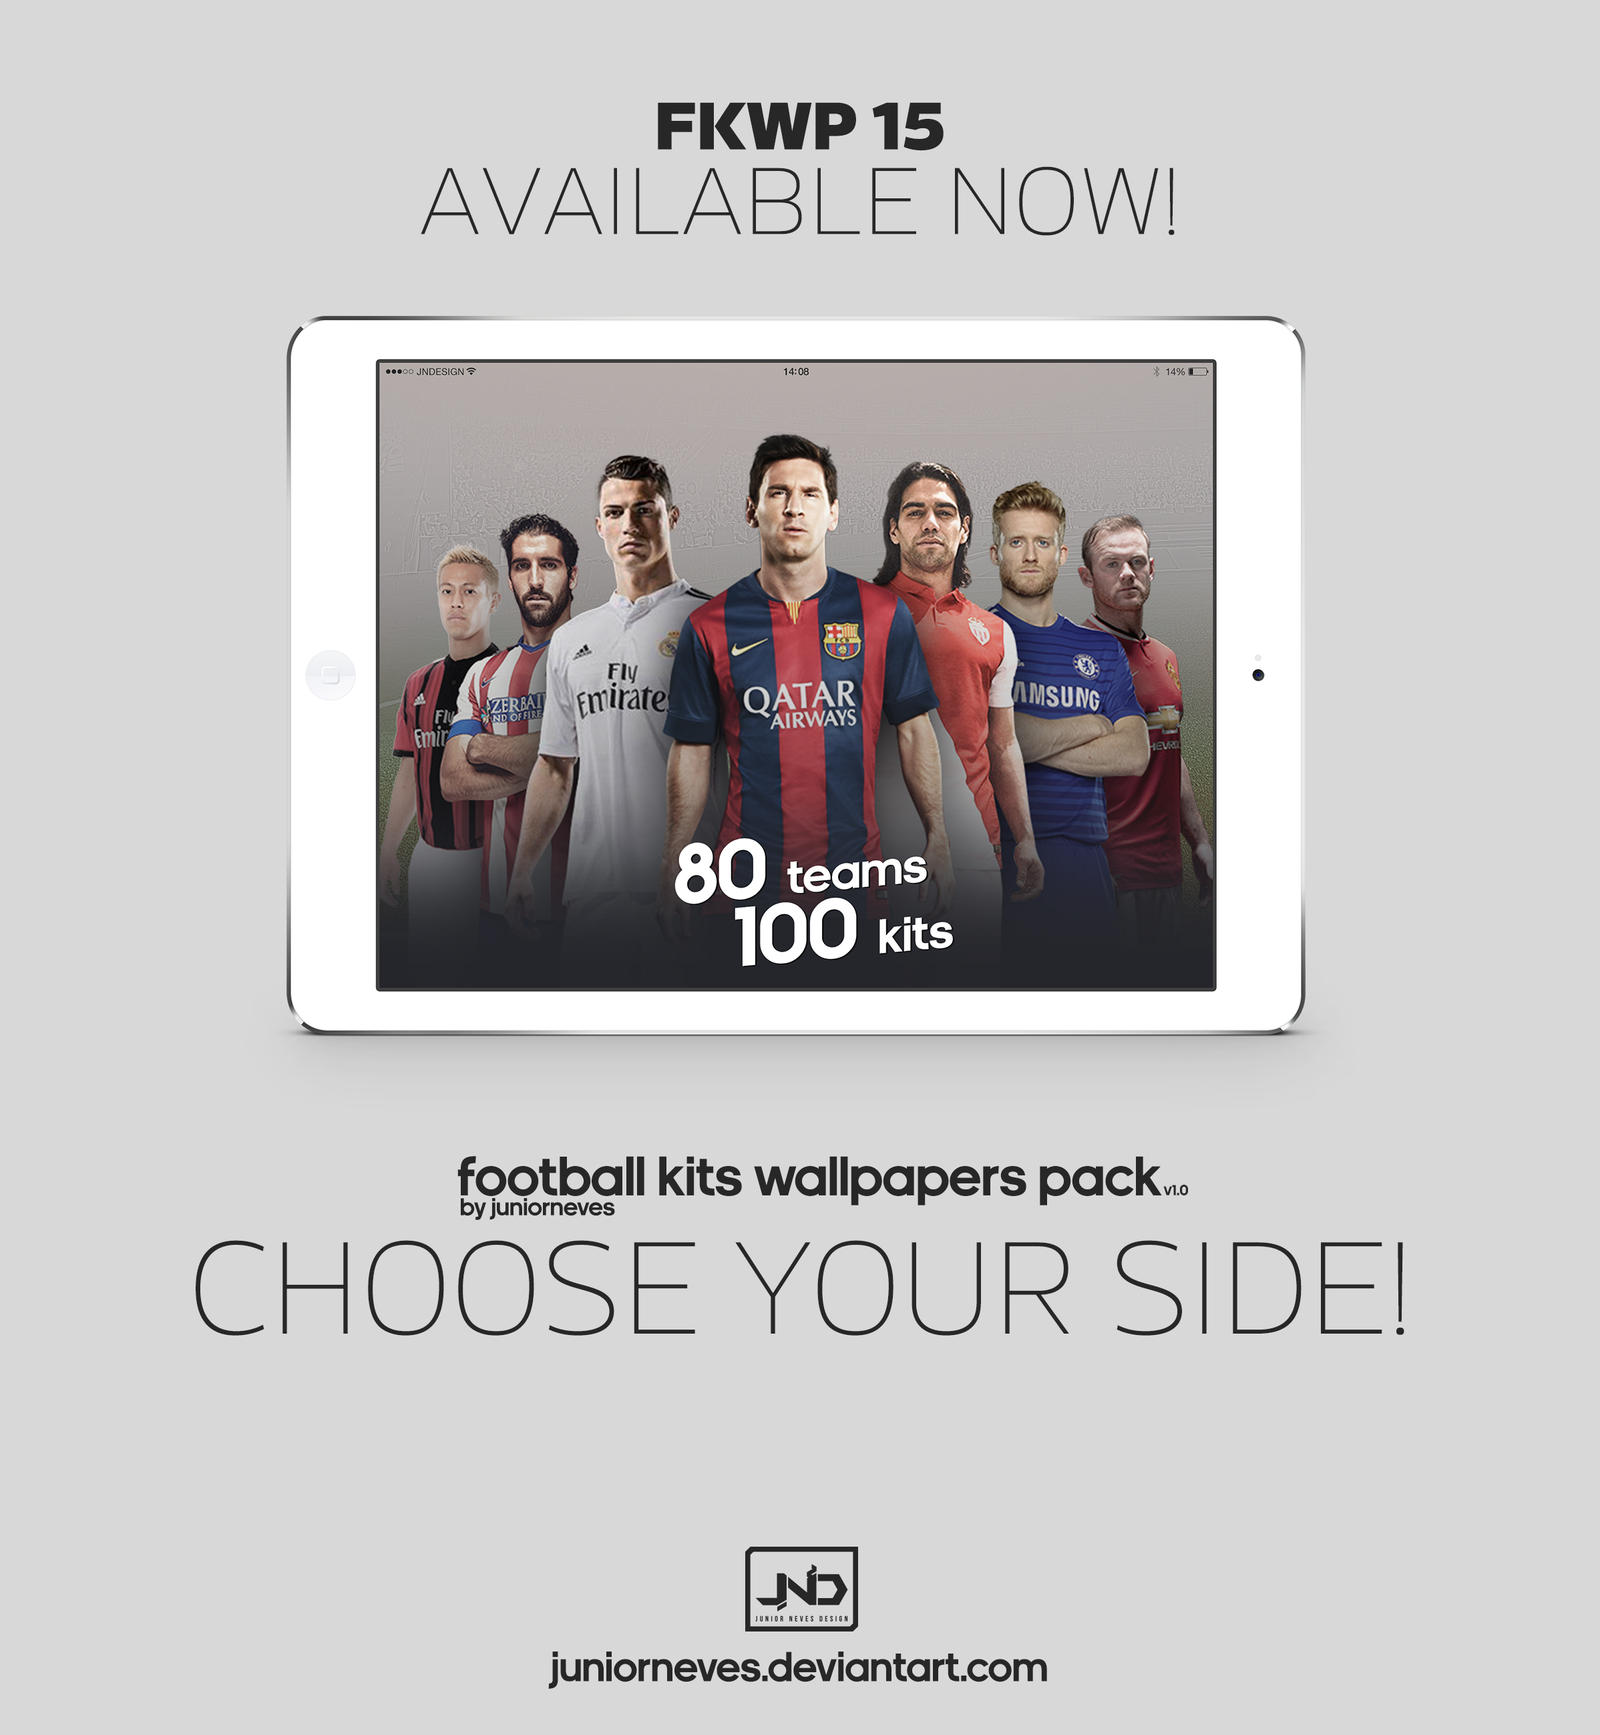 FKWP - CHOOSE YOUR SIDE